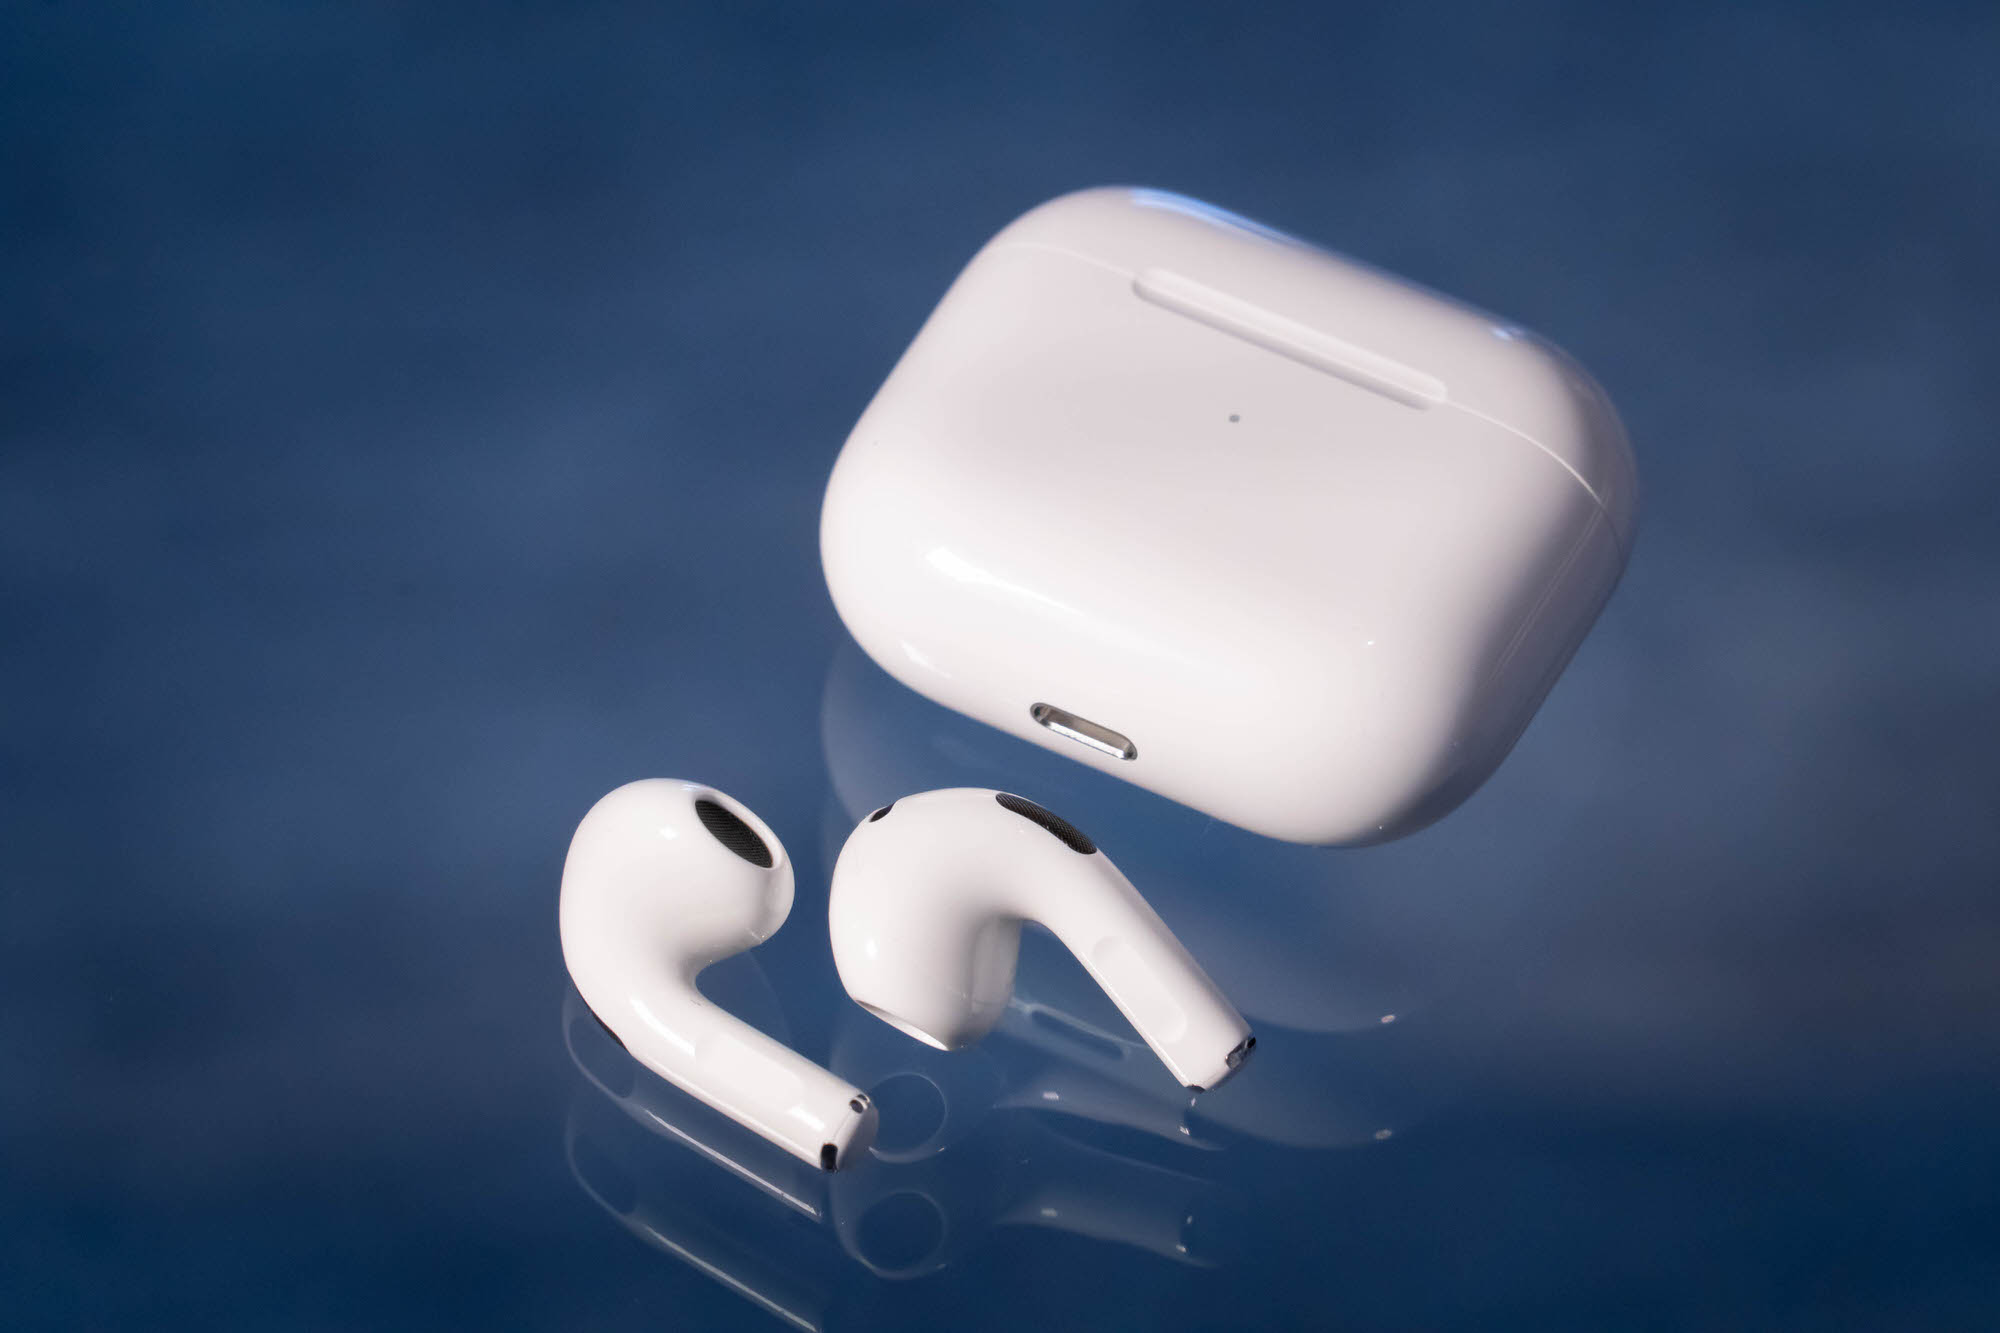 Extra Investigation I agree to AirPods レビュー (第3世代) デザイン刷新の新型モデル、気になる使い勝手・装着感を検証 | CoRRiENTE.top